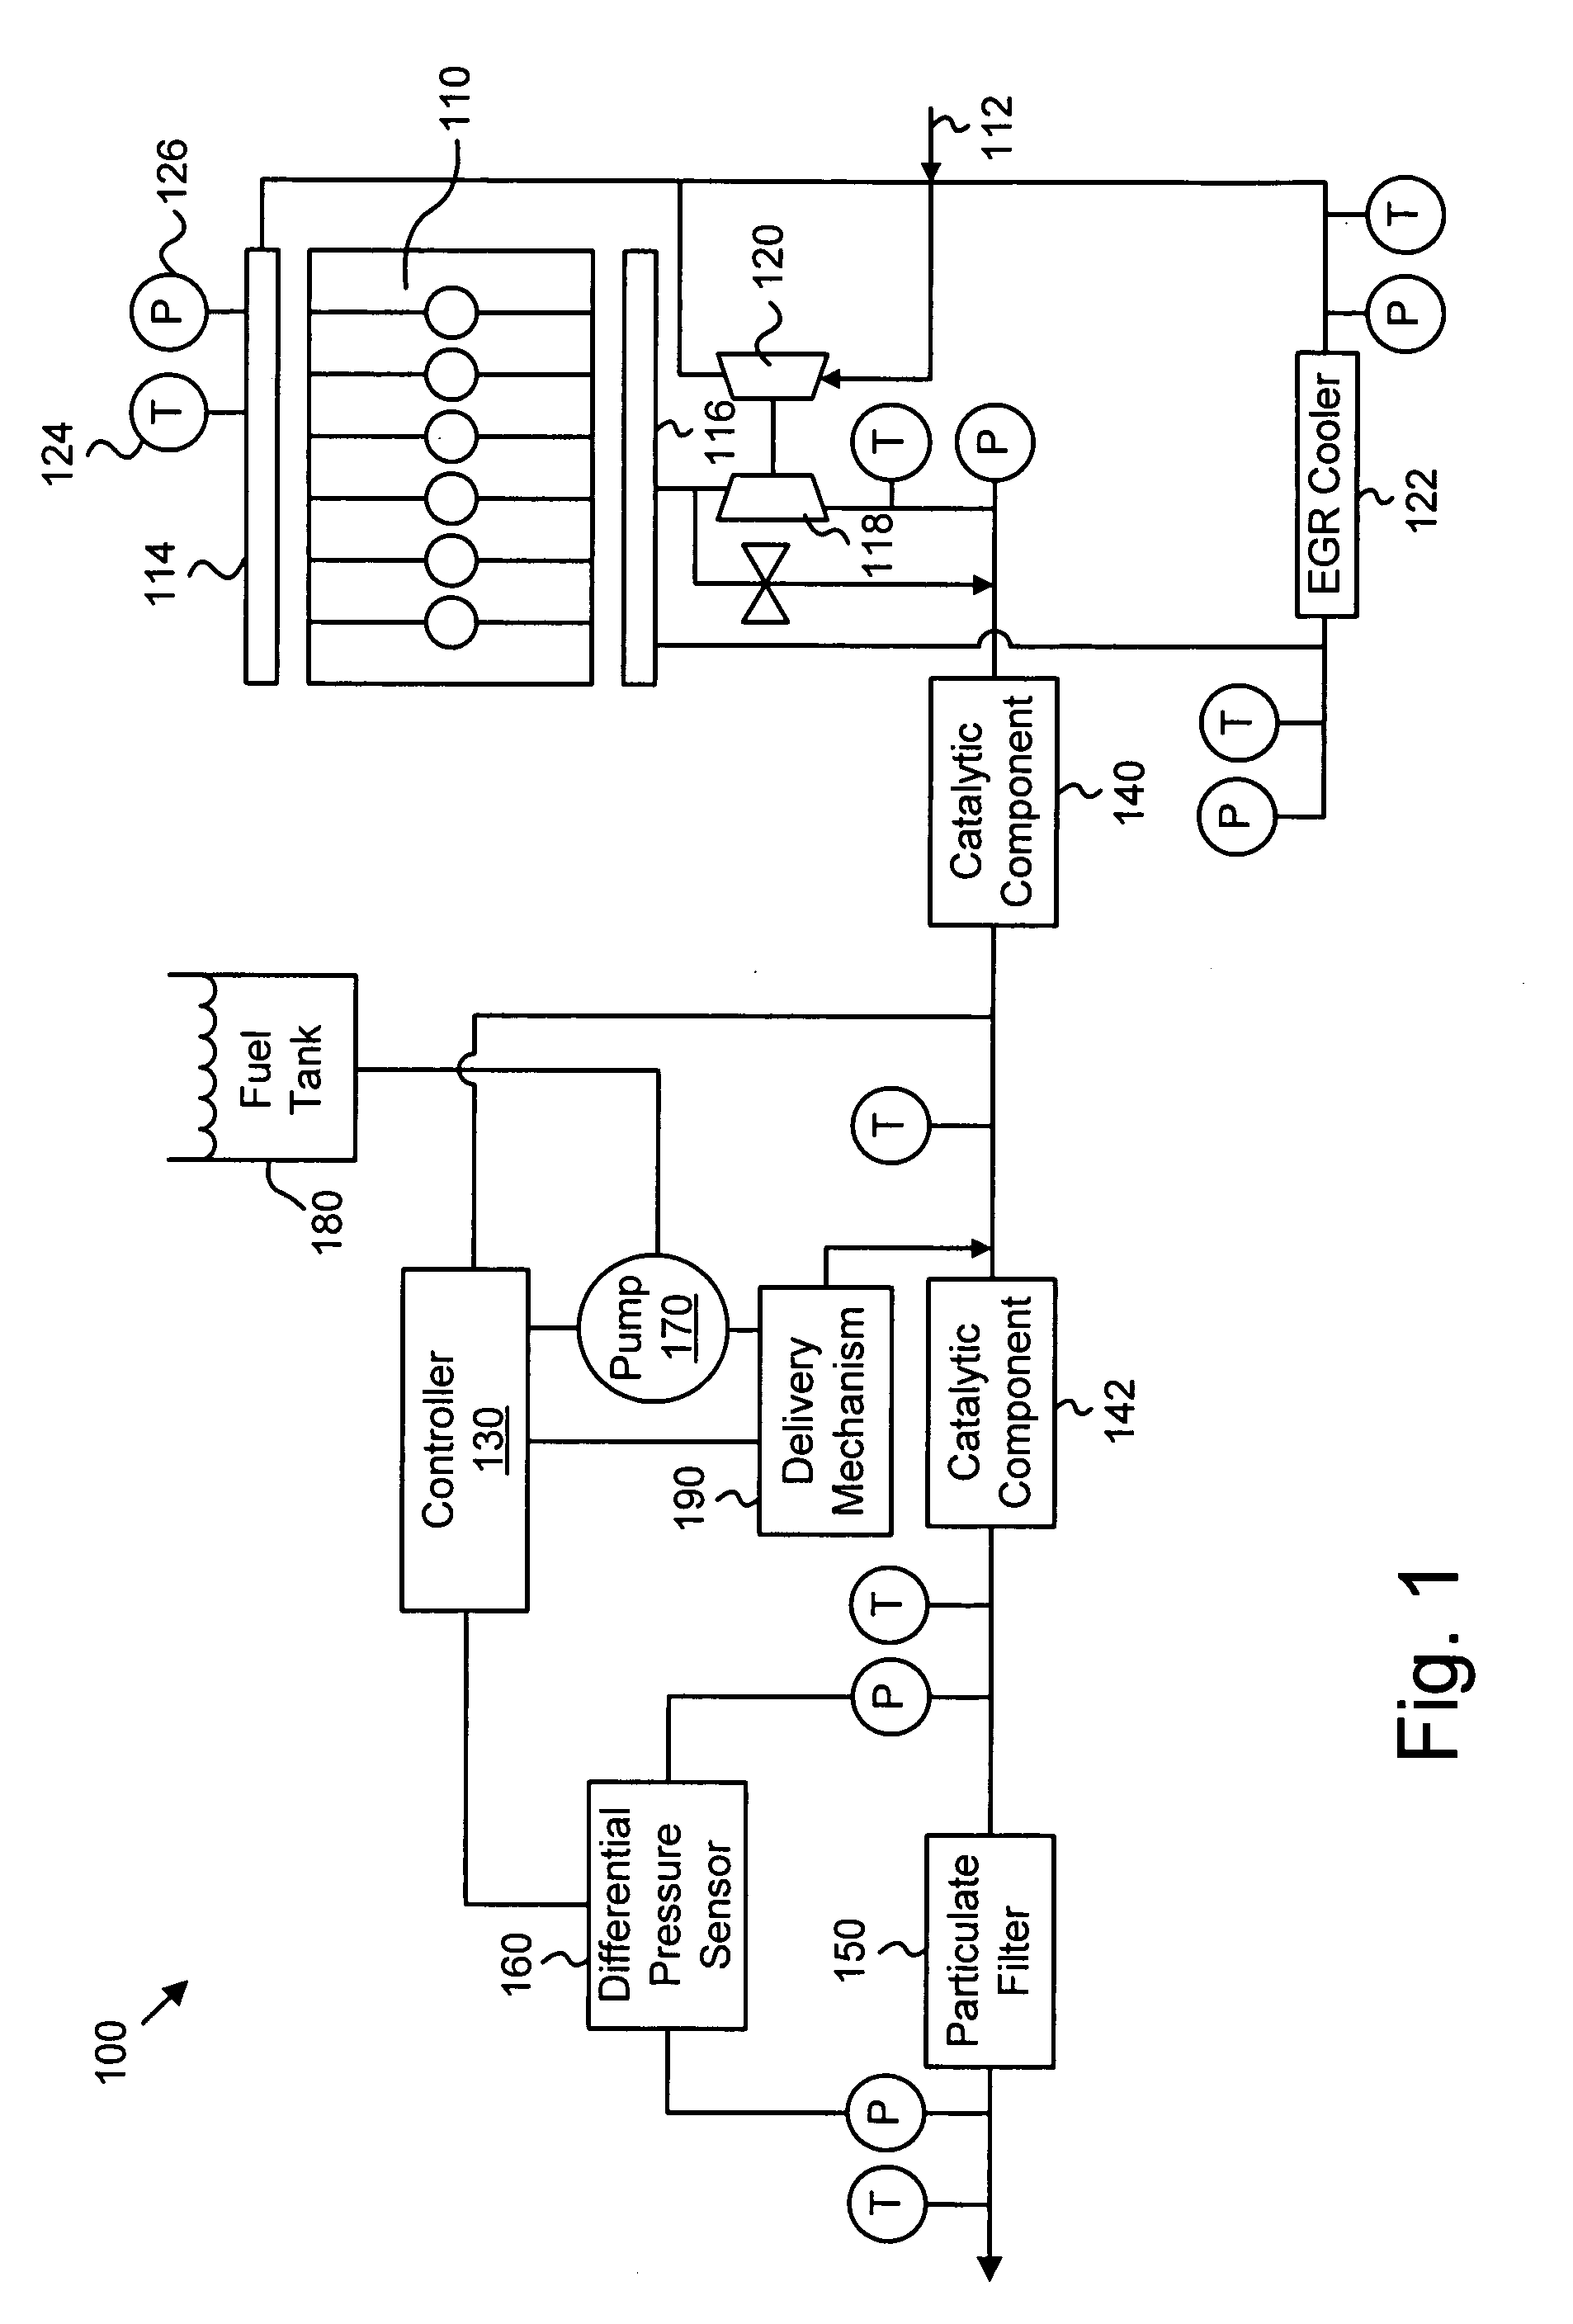 Apparatus, system, and method for detecting and labeling a filter regeneration event